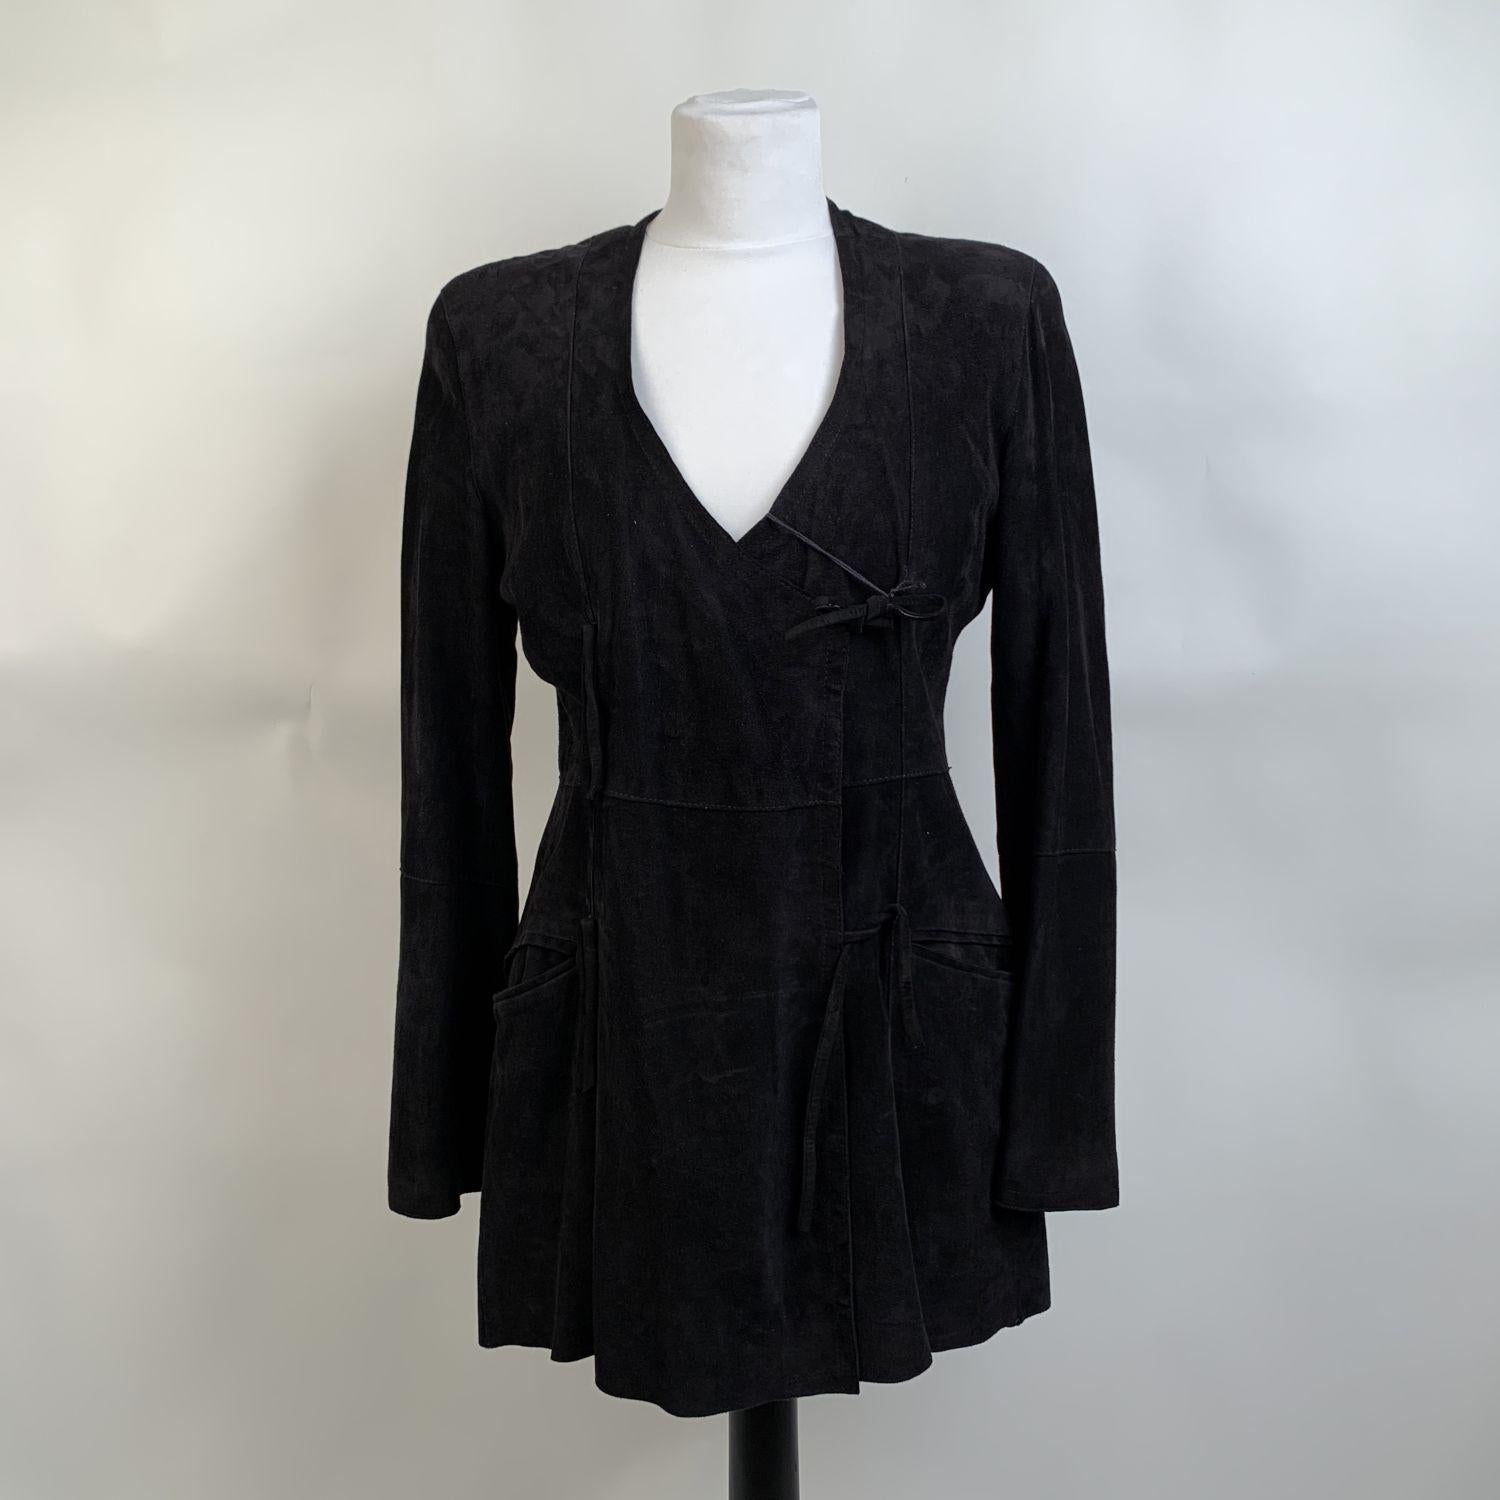 Giorgio Armani - Black Label suede jacket with asymmetric design. Long sleeve styling. Self-tie closure. Fitted waist. Satin lining. 2 pockets on the waist. Made in Italy. Size: 42 IT (The size shown for this item is the size indicated by the